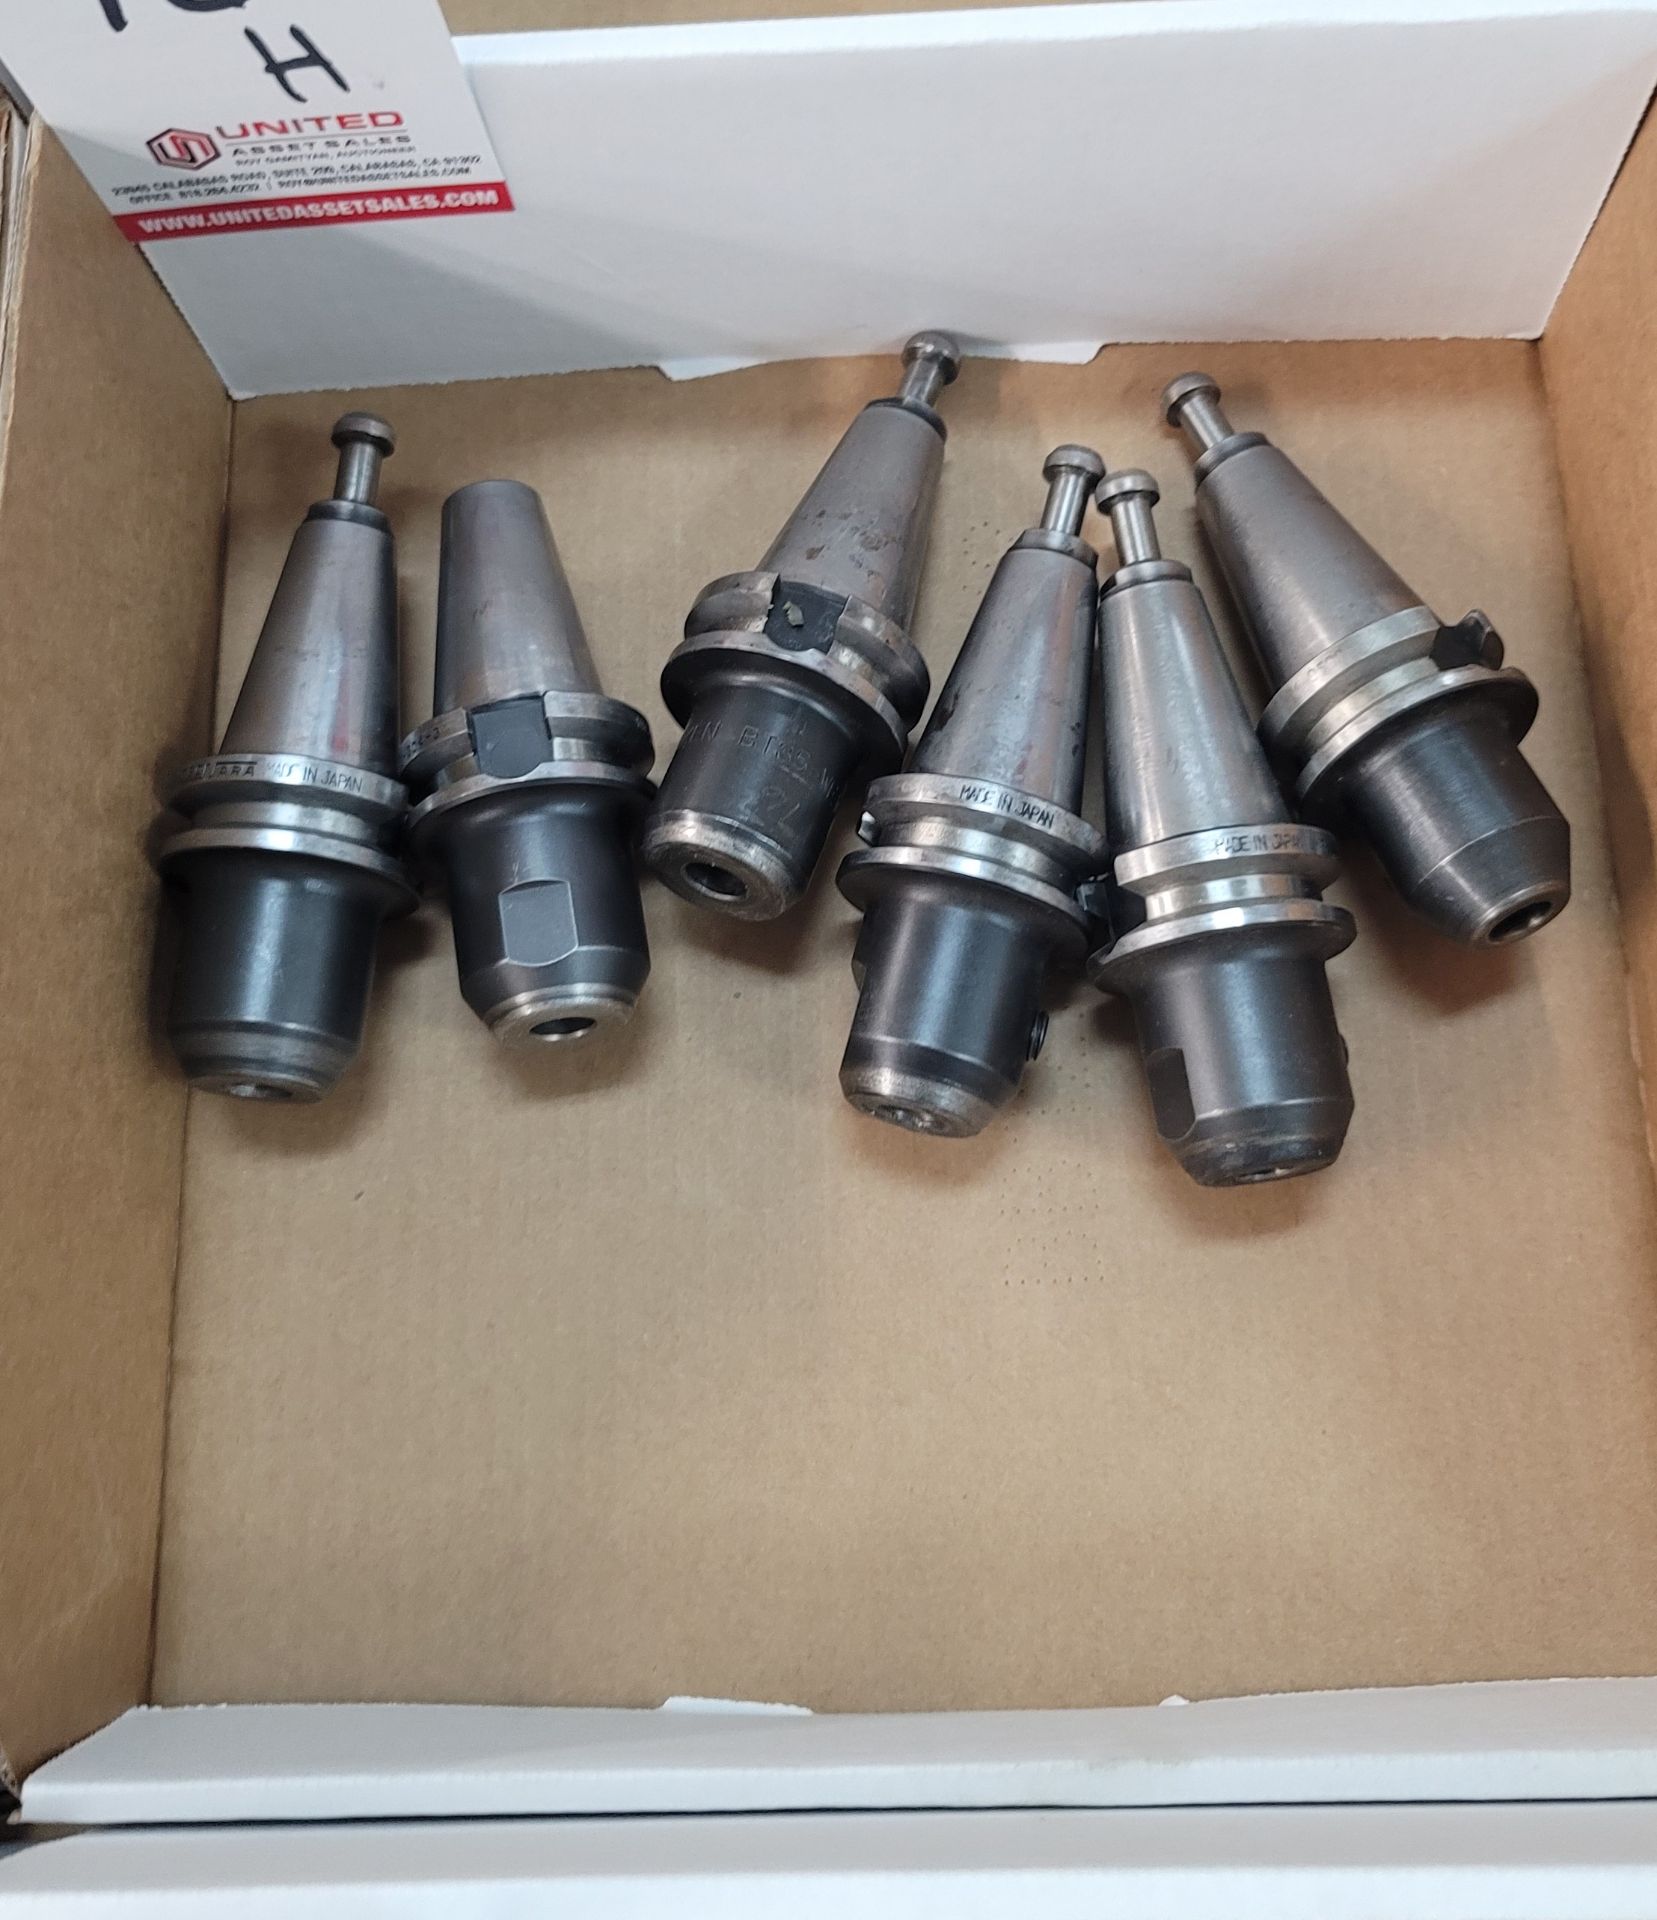 LOT - (6) BT-35 TOOL HOLDERS, 1/2" SOLID, **IMMEX REGISTERED EQUIPMENT (NEEDS TO RETURN TO THE US)